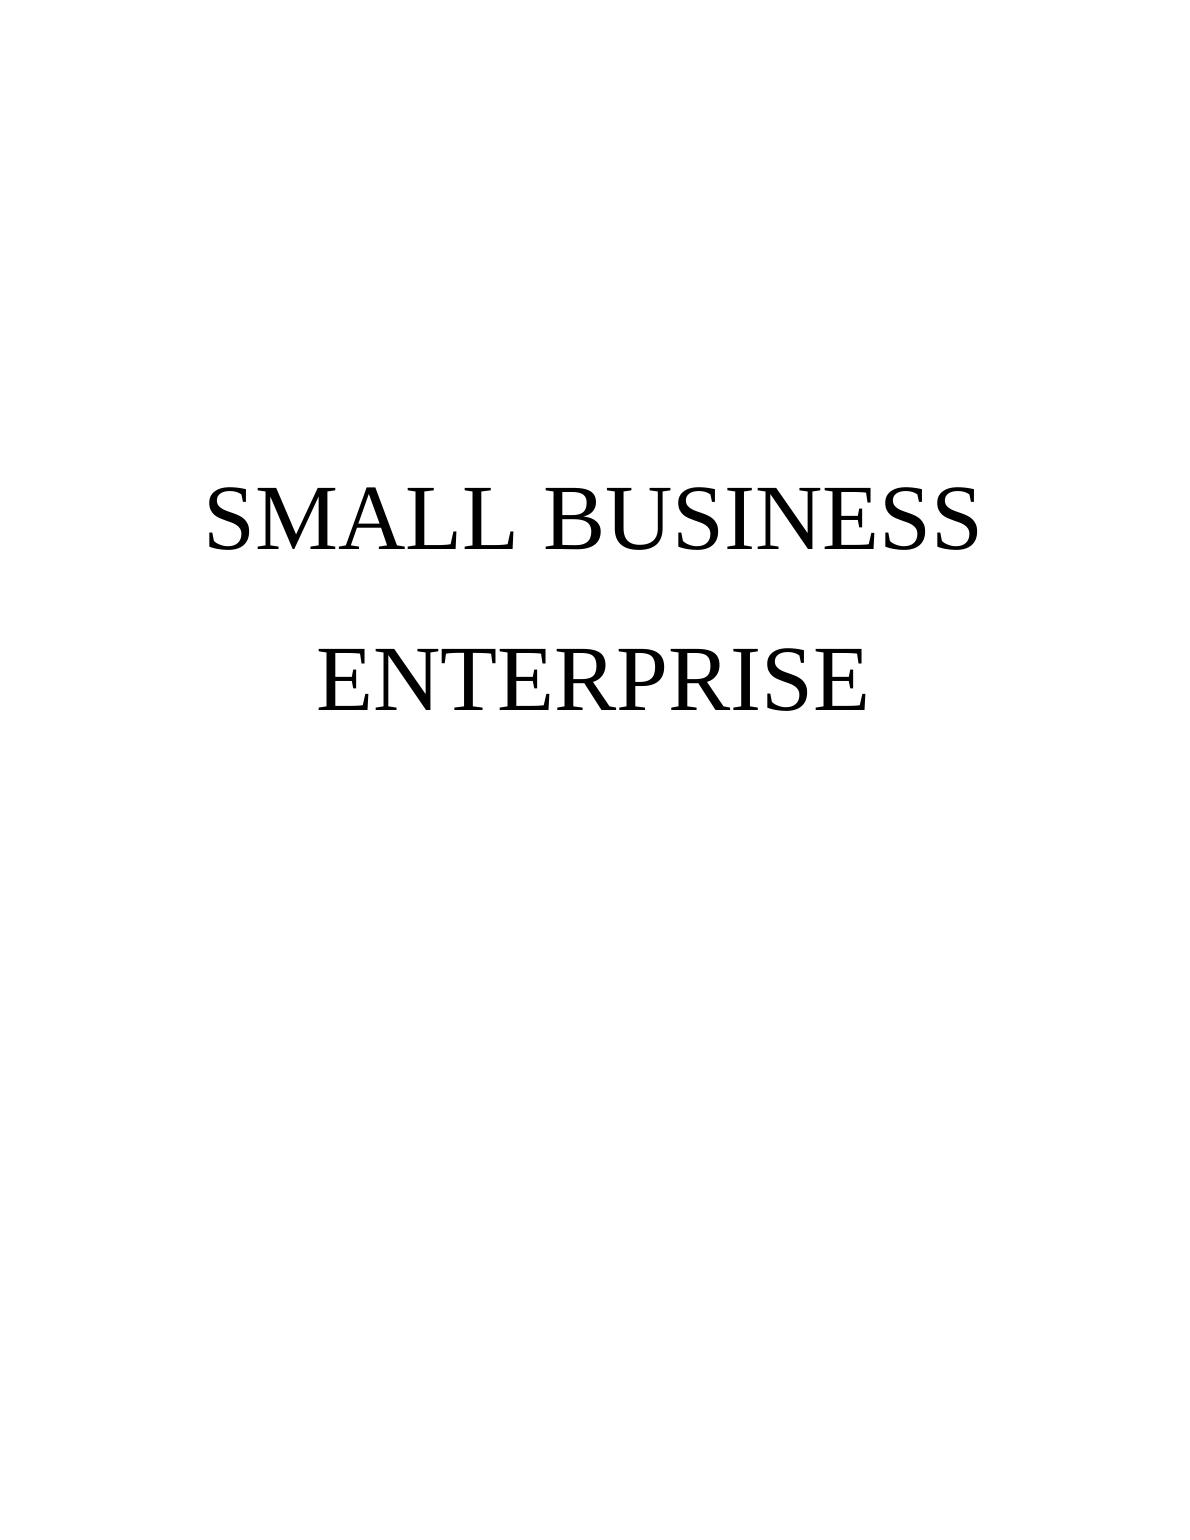 Small Business Enterprise InTROduction 3 TASK 13 1.1: Profile of business to identify weaknesses and strengths_1